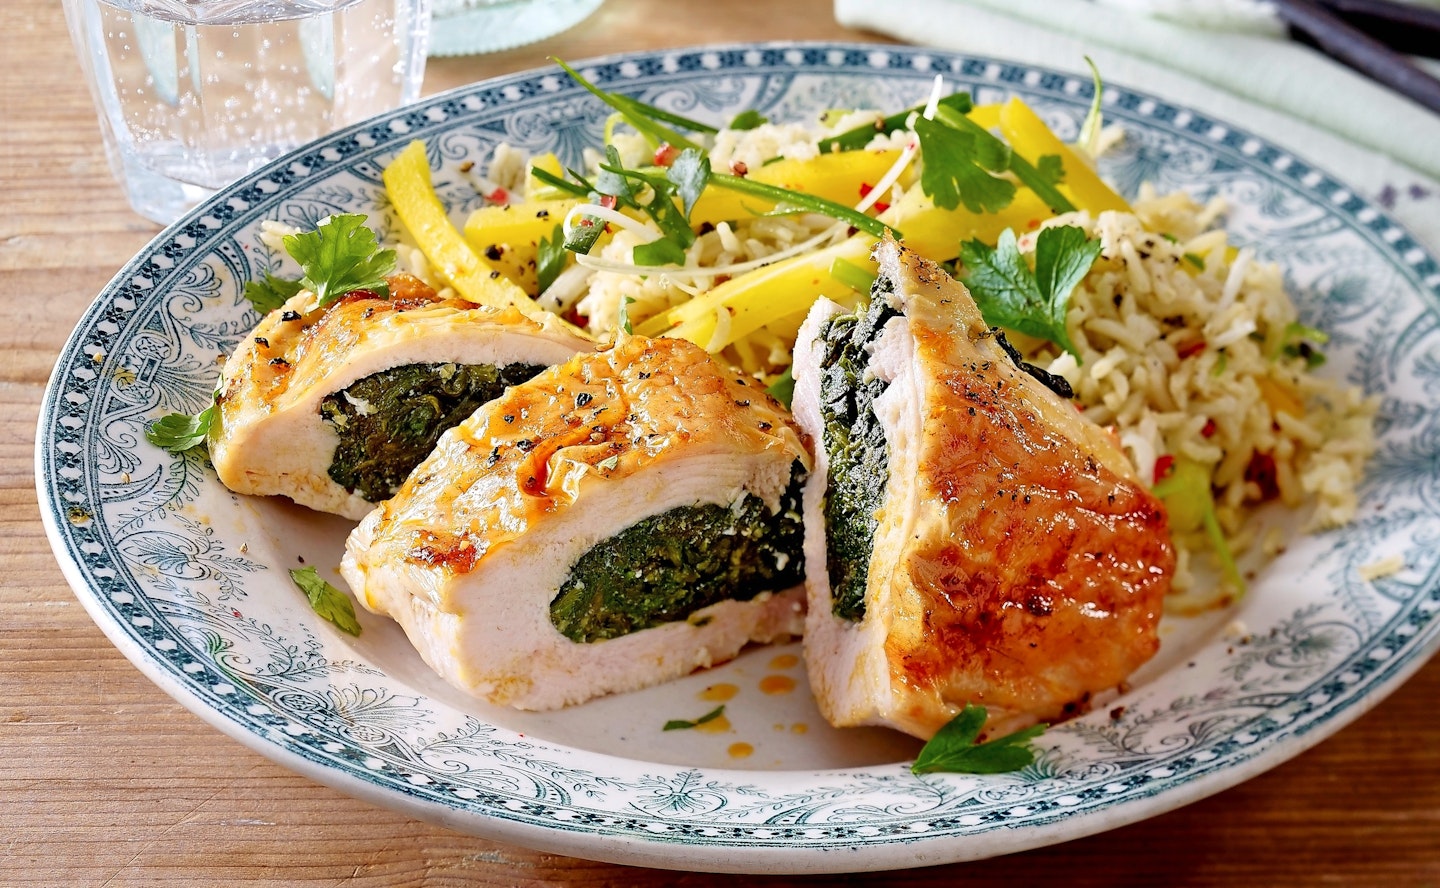 Chicken and spinach dish